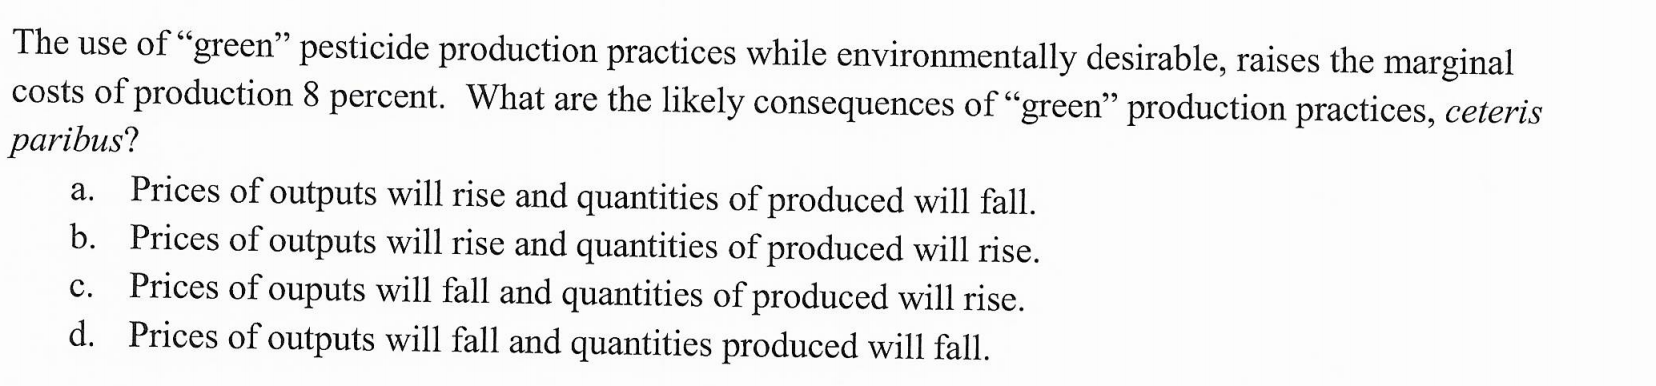 The use of "green" pesticide production practices while environmentally desirable, raises the marginal
costs of production 8 percent. What are the likely consequences of "green" production practices, ceteris
paribus?
Prices of outputs will rise and quantities of produced will fall.
b. Prices of outputs will rise and quantities of produced will rise
Prices of ouputs will fall and quantities of produced will rise.
d. Prices of outputs will fall and quantities produced will fall.
а.
с.
